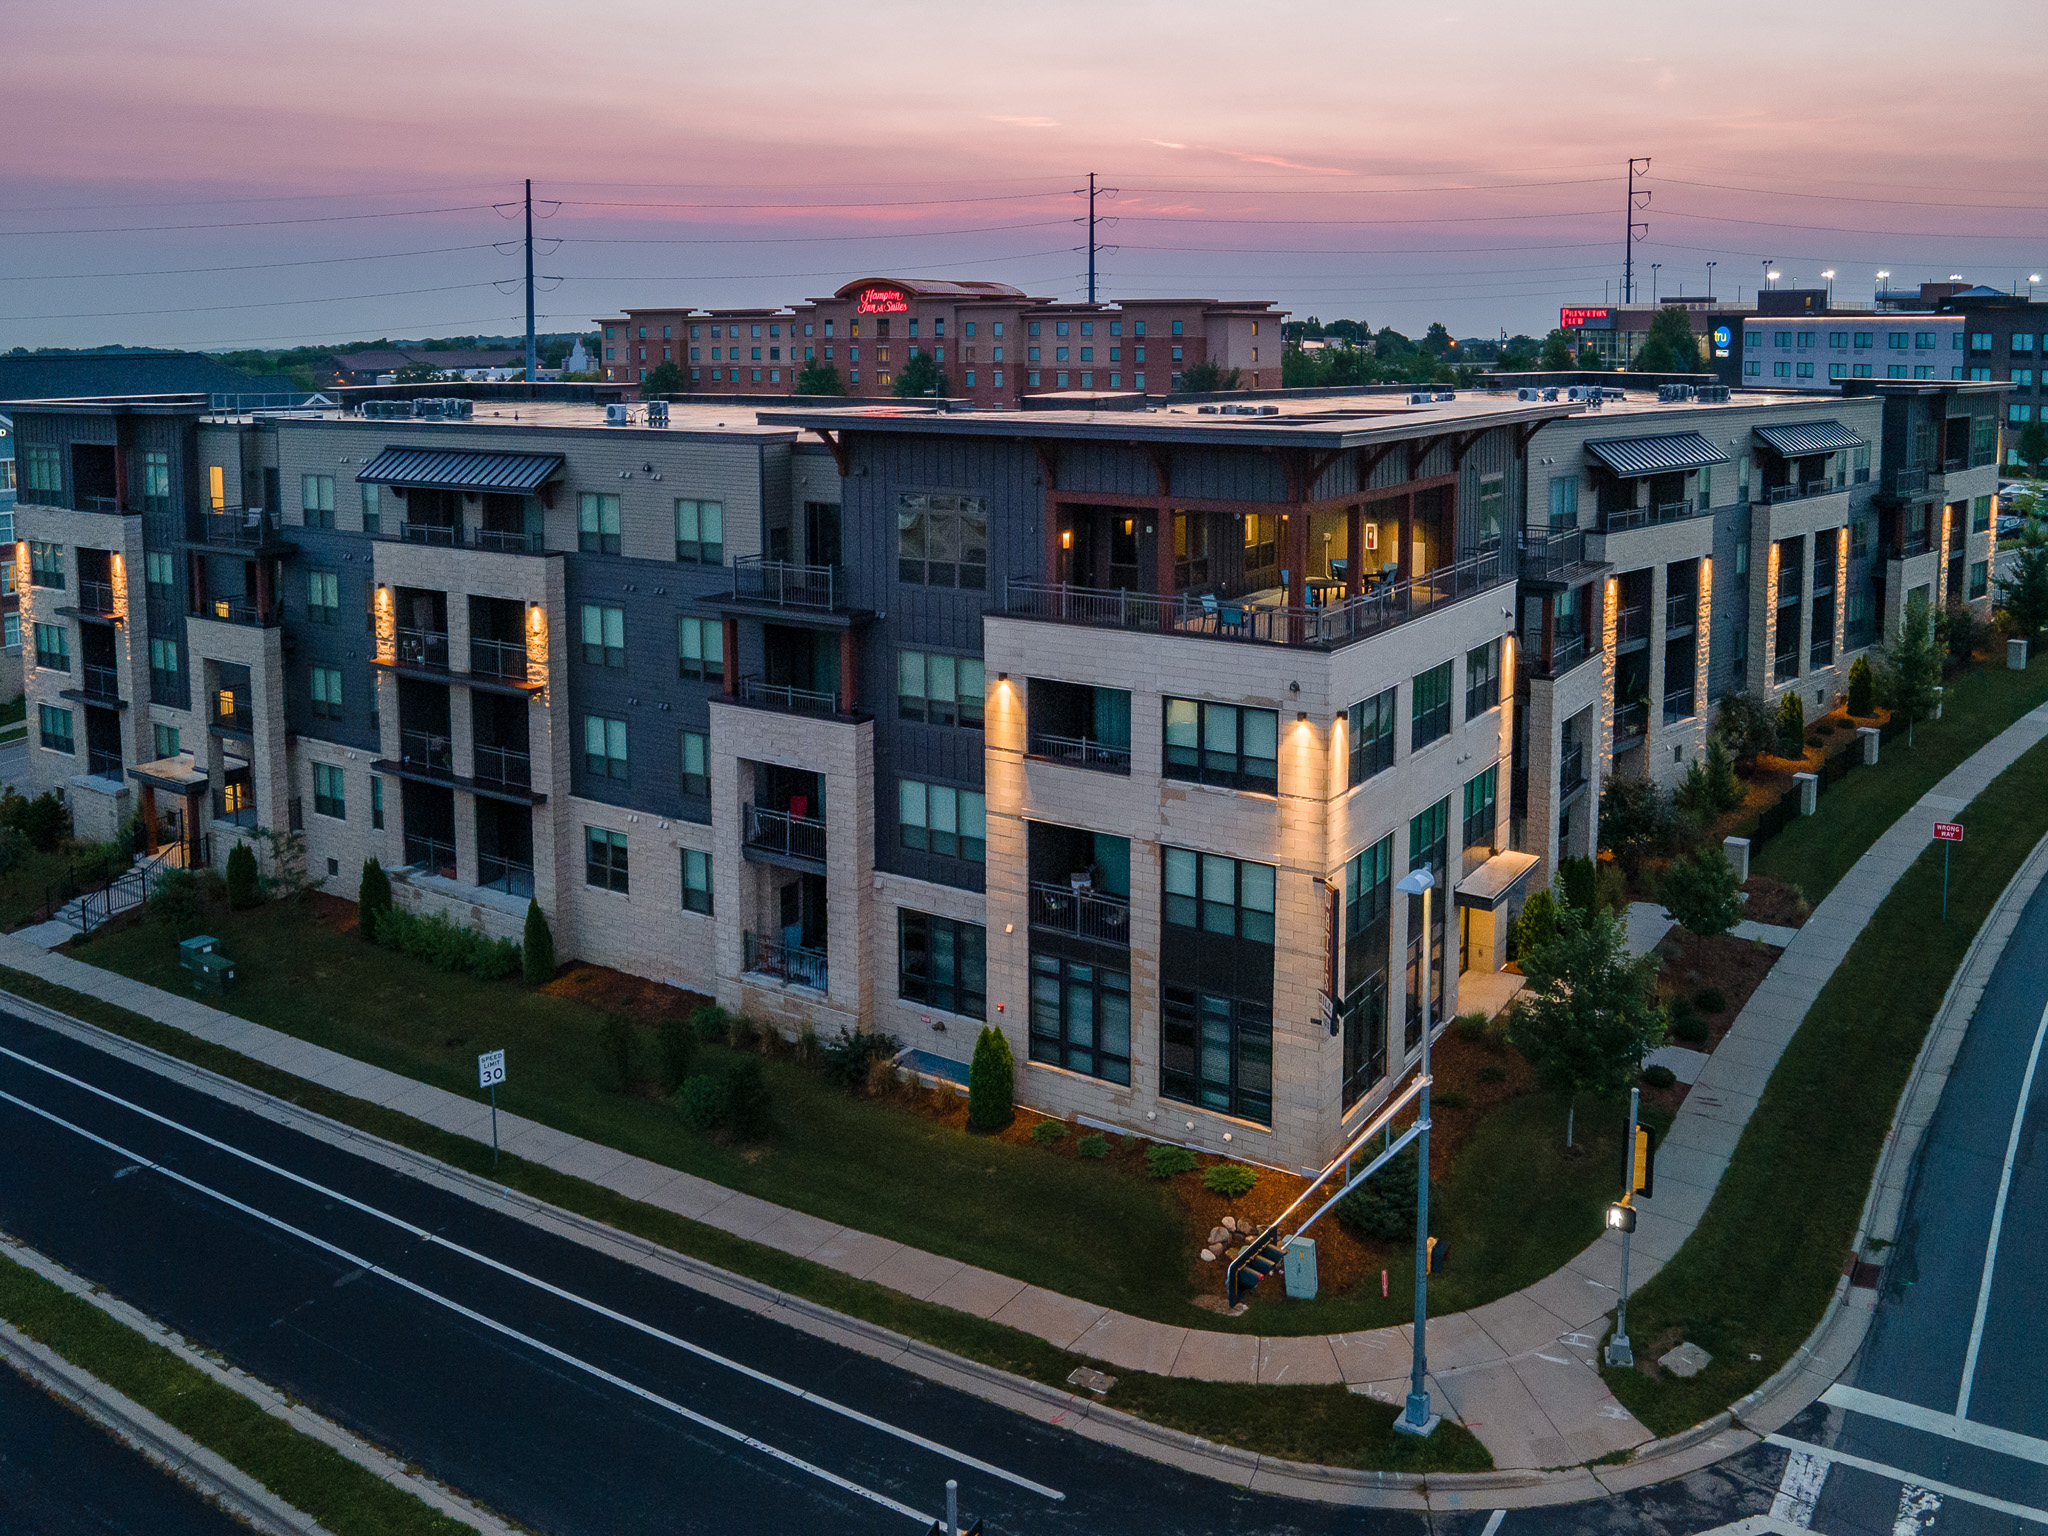 Aerial view of an apartment complex at dusk